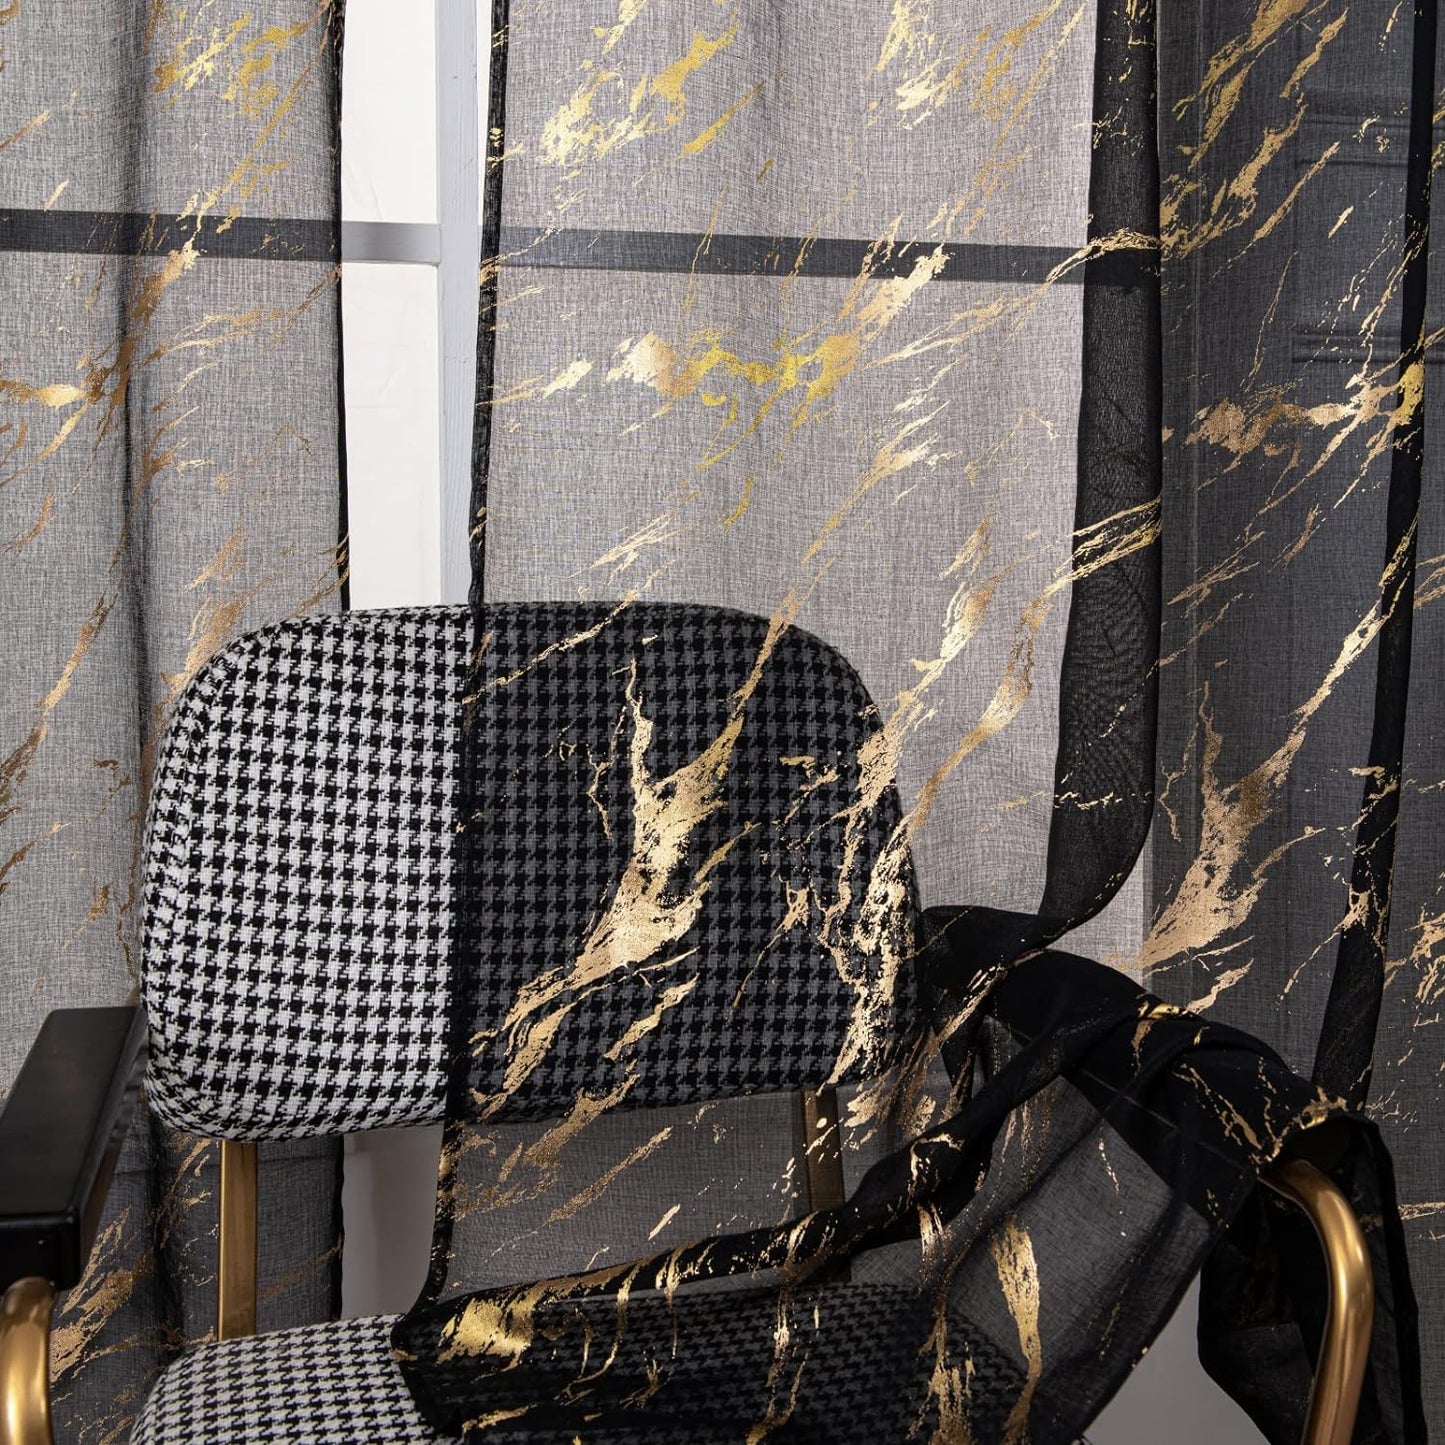 Sutuo Home Marble White Sheer Curtains 84 Inch Length, Gold Foil Print Metallic Bronzing, Privacy Window Treatment Decor Abstract Drape Pair 2 Panels Set for Bedroom Kitchen Living Room 52" W X 84" L  Sutuo Home Gold And Black 52" W X 96" L, 2 Panels 